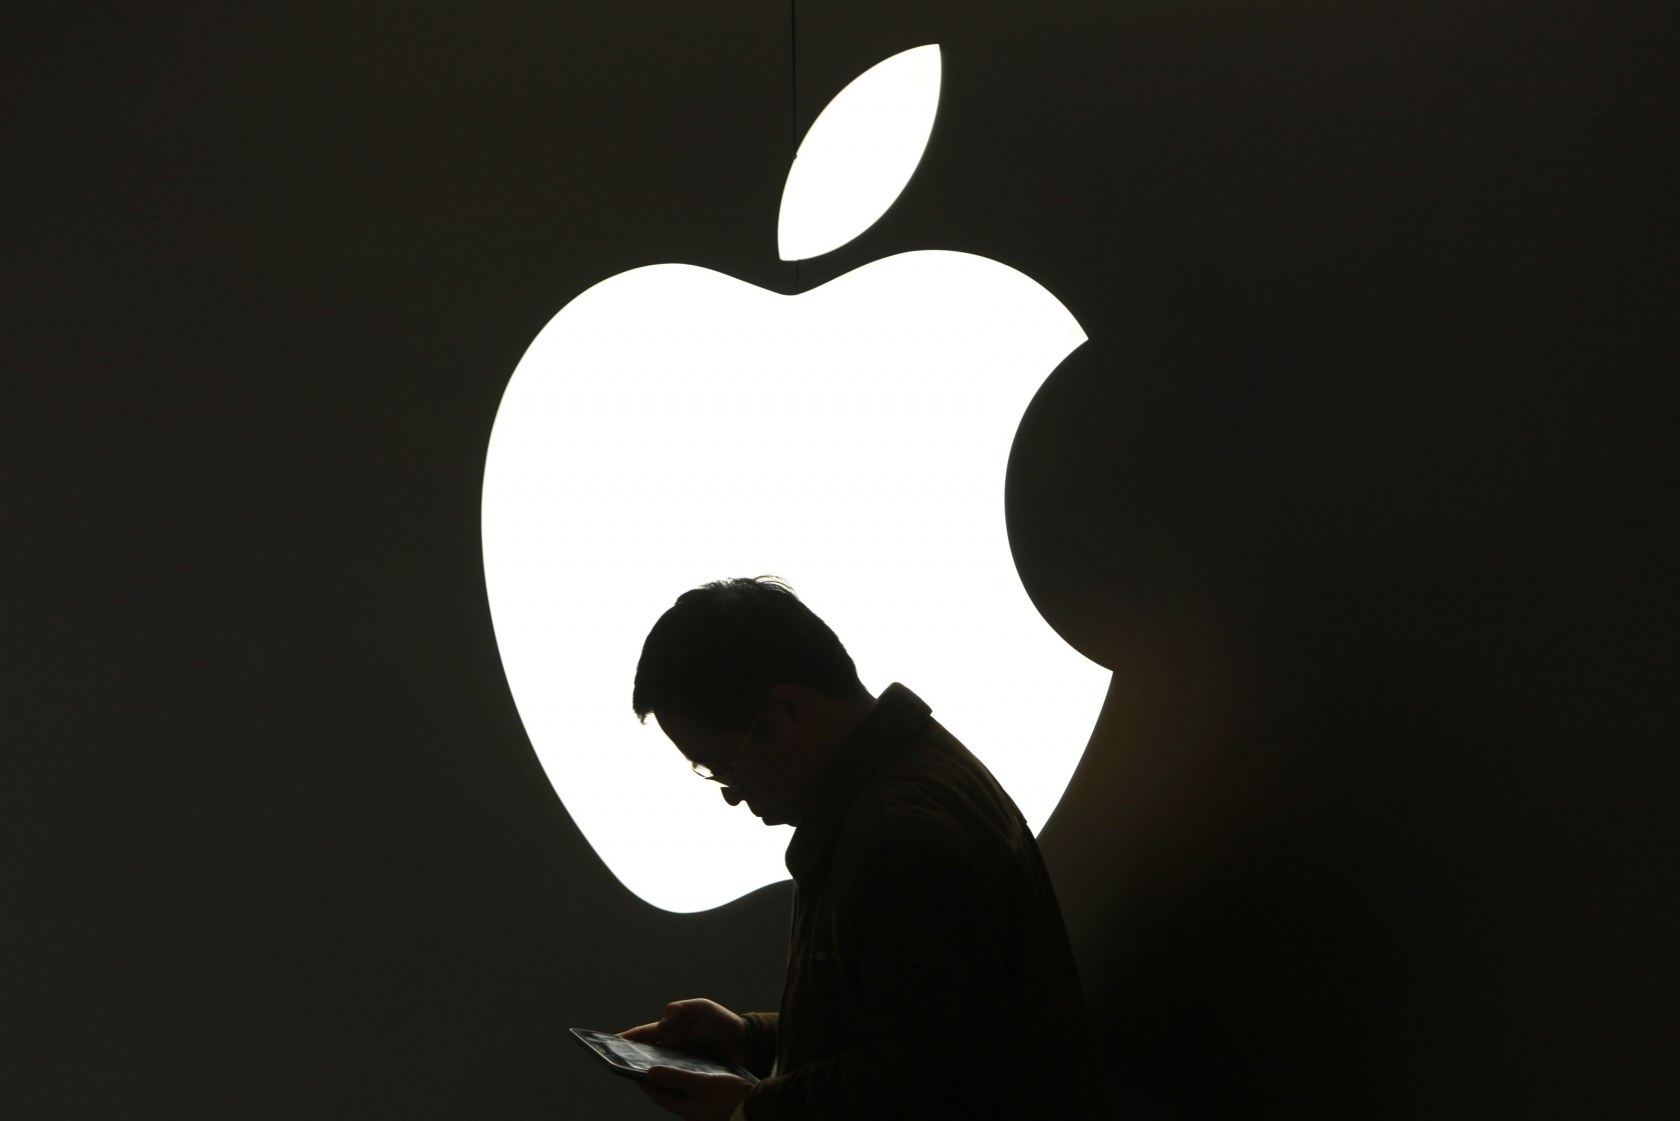 Teen hacks Apple systems and makes off with 90GB of data